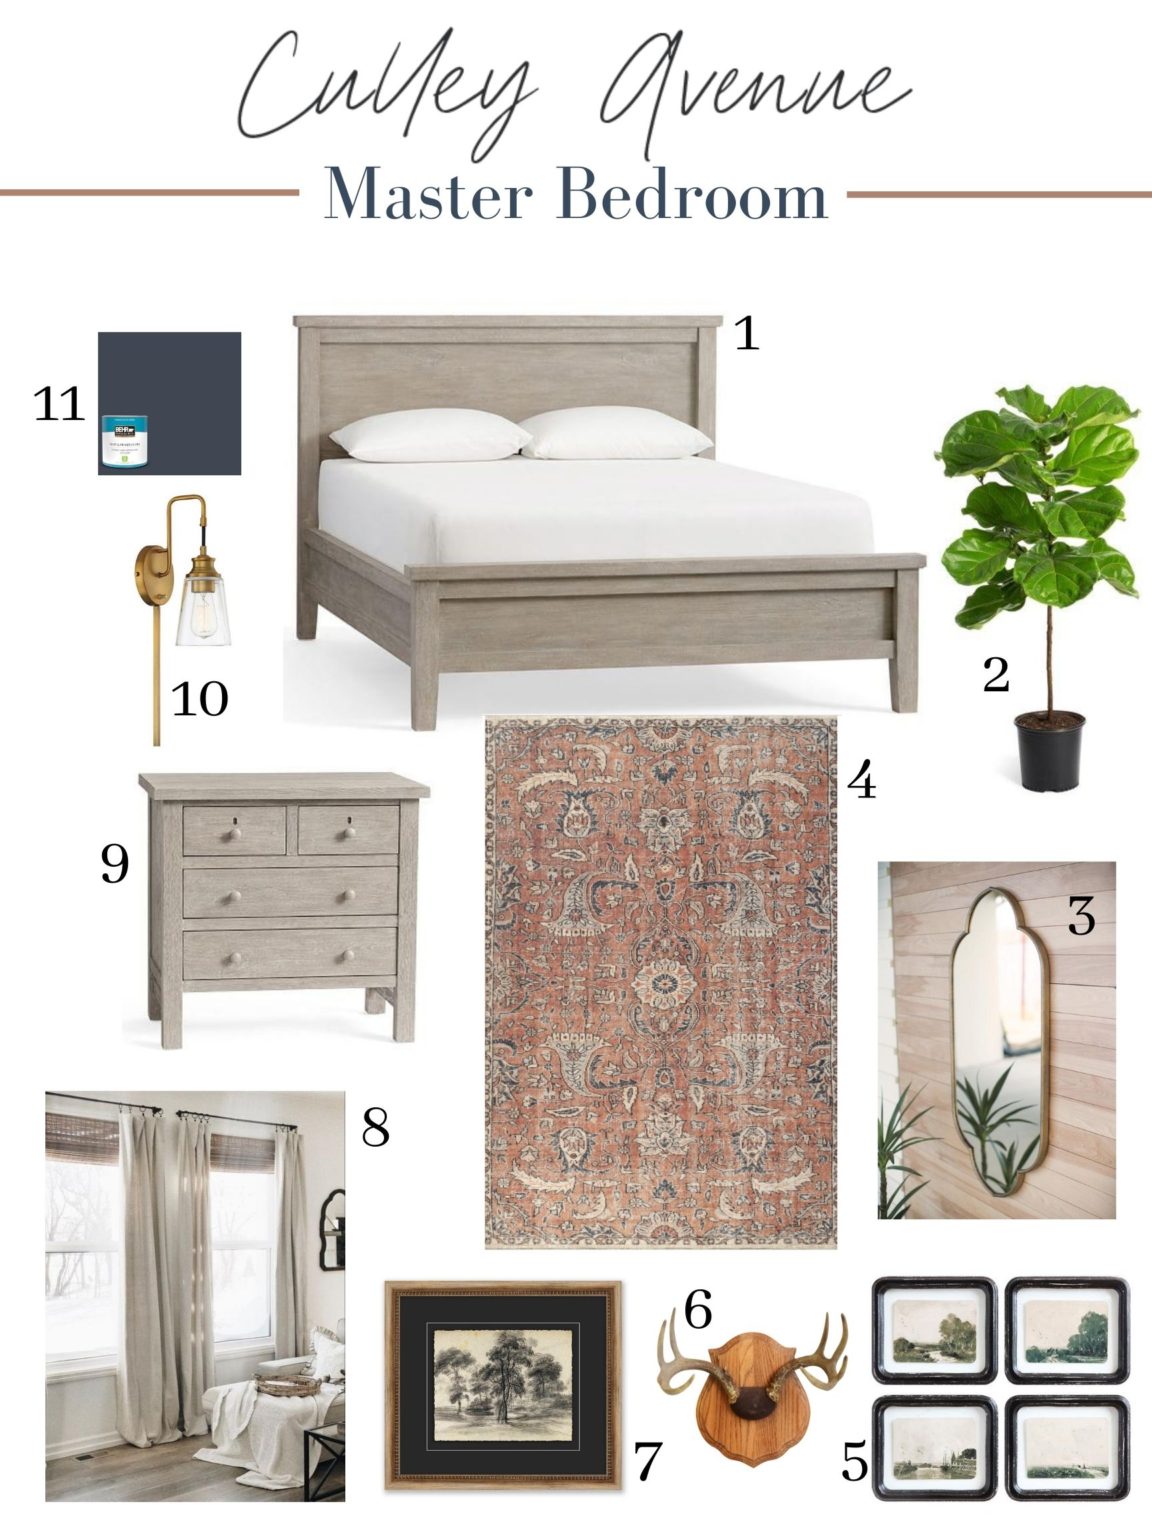 Farmhouse Master Bedroom Remodel on a Budget - Culley Avenue